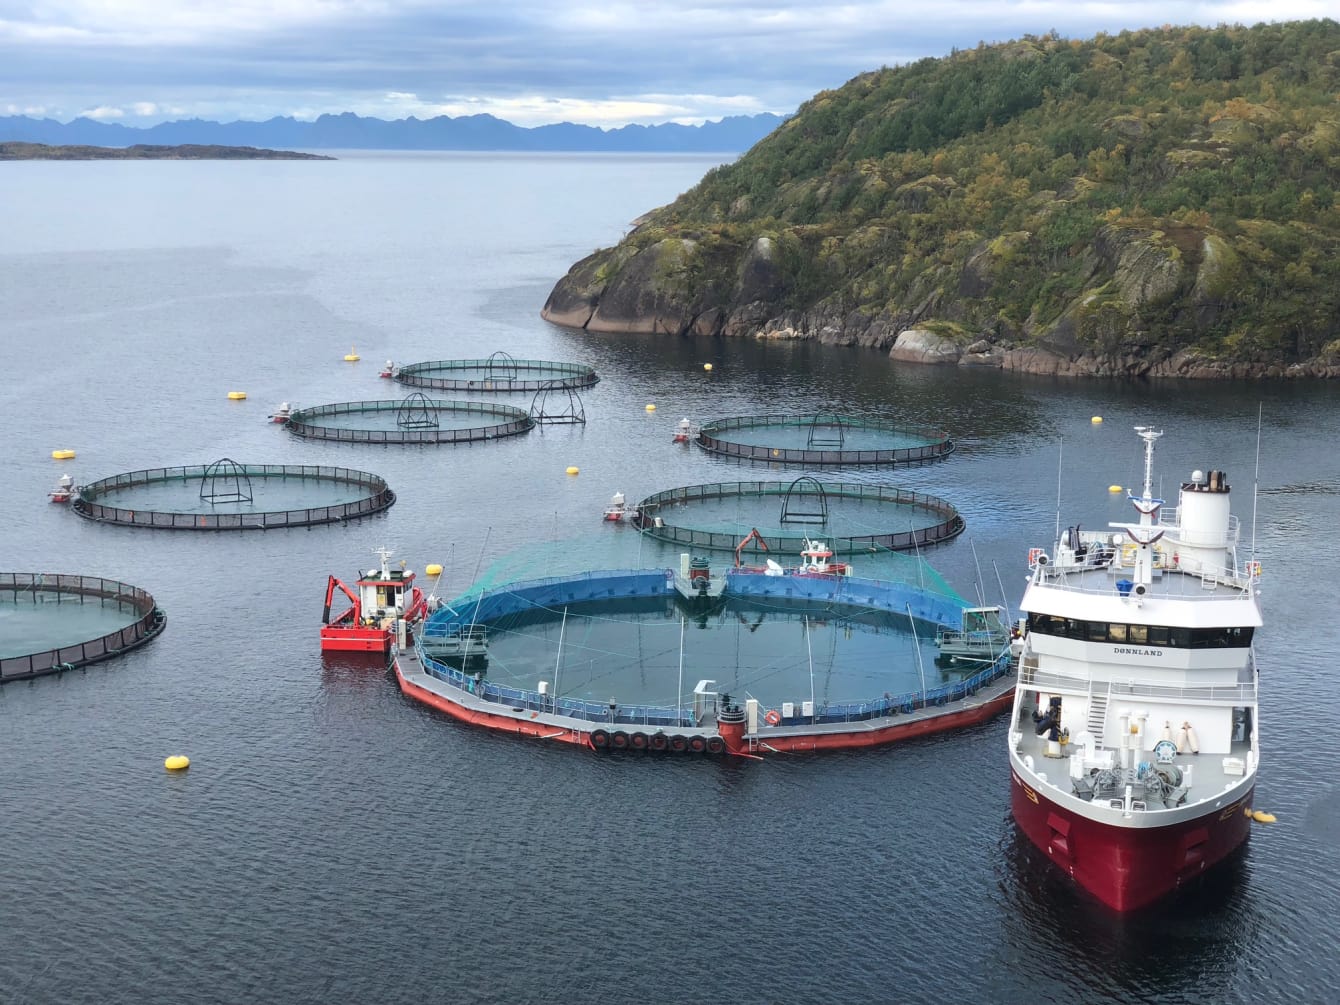 Production Starts at Cermaq’s New Closed Containment System in Horsvågen